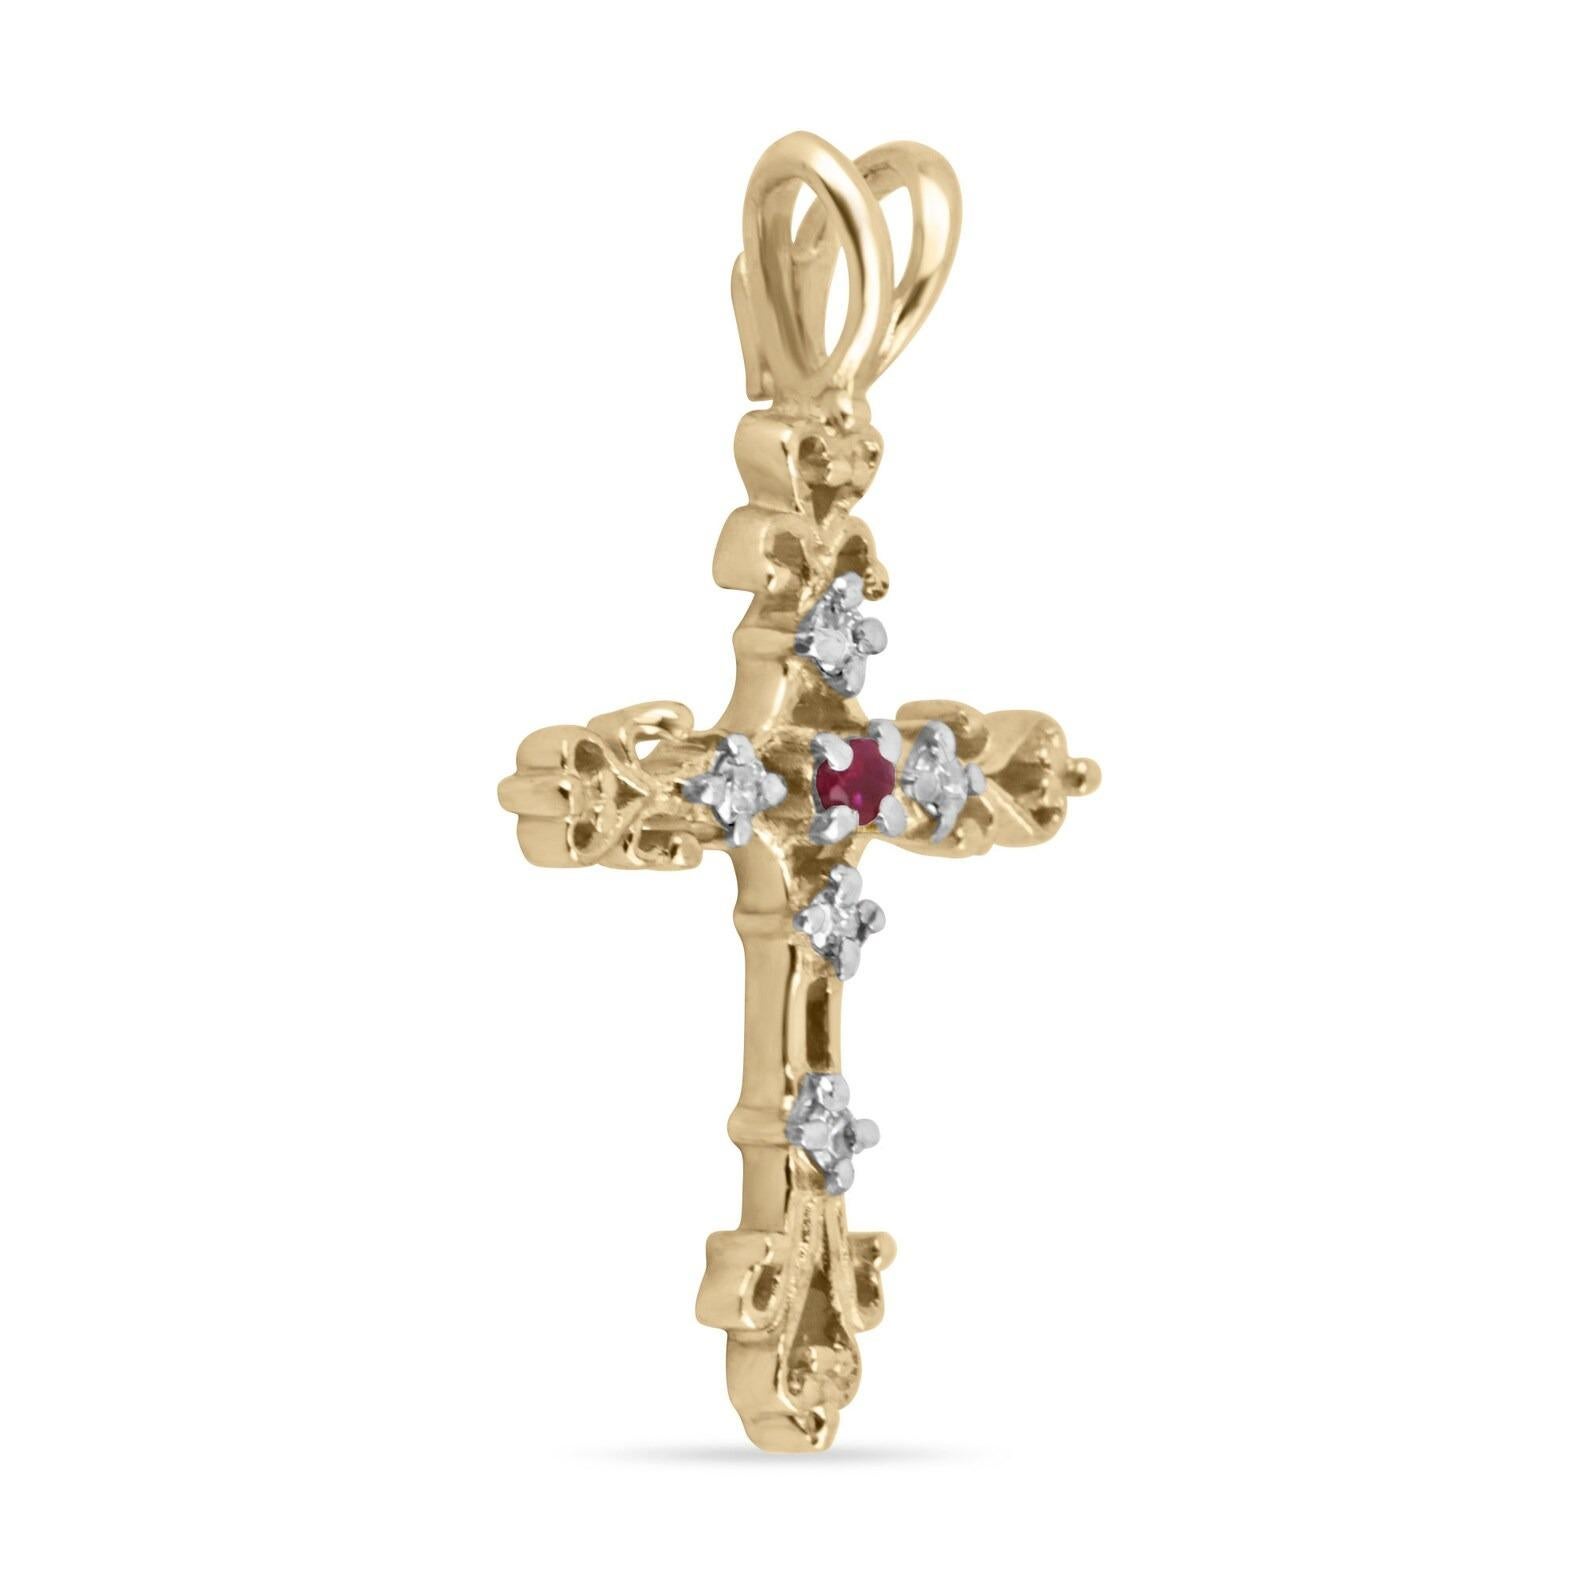 A stunning natural ruby and diamond cross pendant. This magnificent piece features a petite round-cut ruby in the center of the cross. Displaying a dark red color, with good clarity and luster. Four brilliant round cut diamonds accent the center